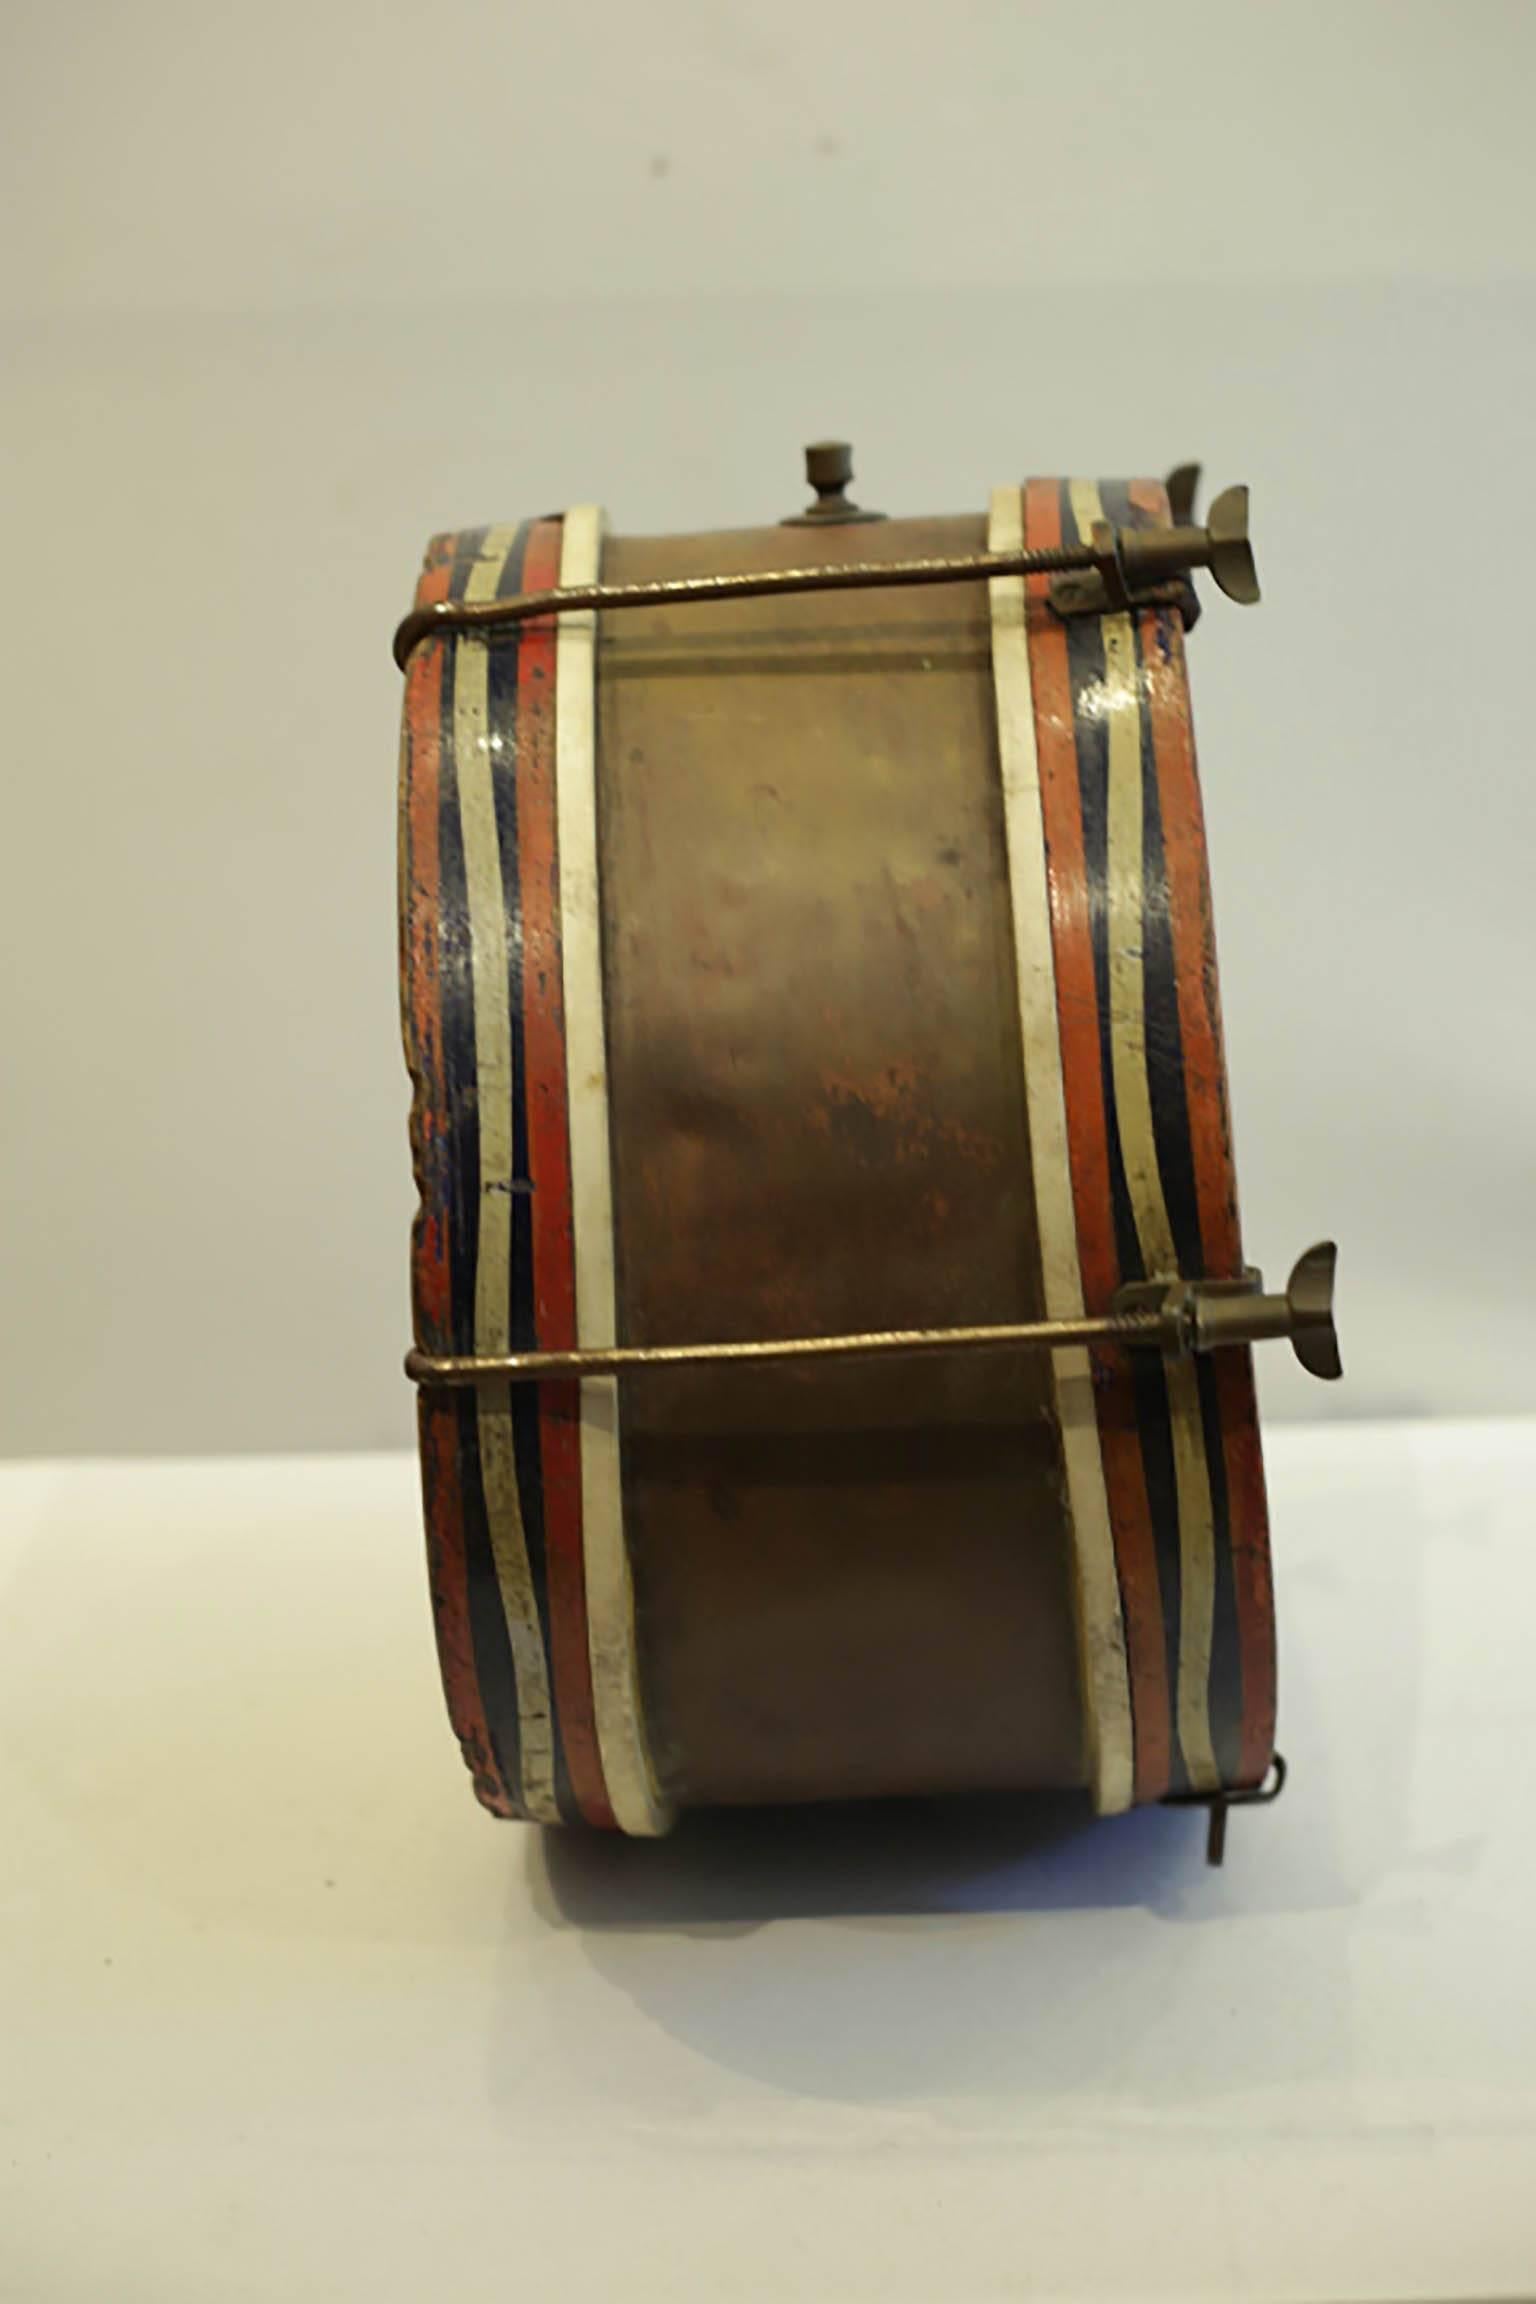 Animal Skin Early 20th Century Wood, Brass and Calfskin Snare Drum, circa 1920-1940s